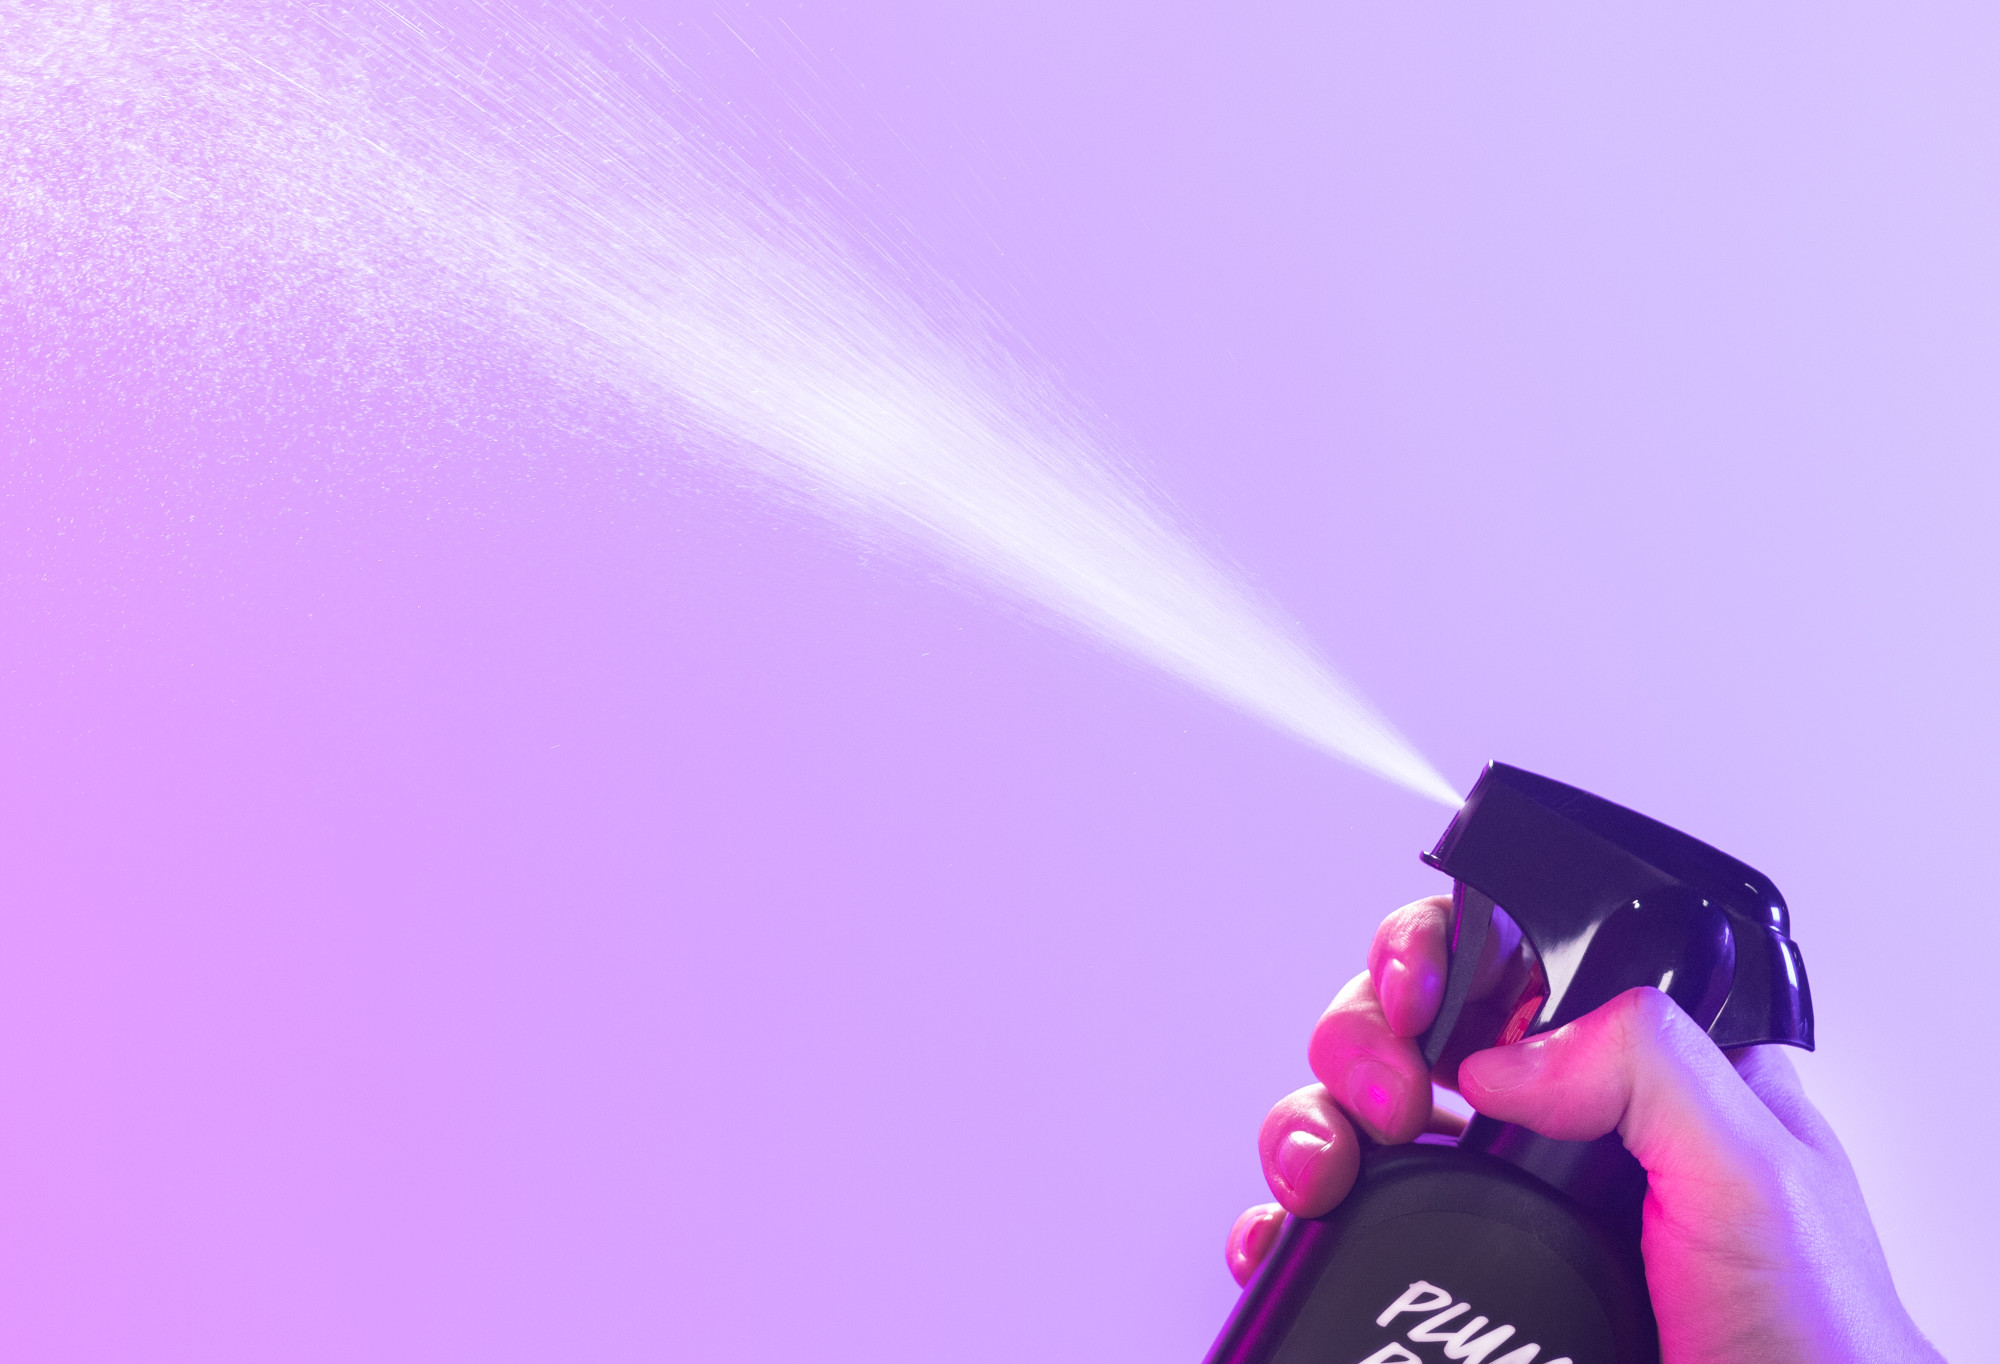 Plum Rain body spray is sprayed up into the air, in front of a bright, light purple background.